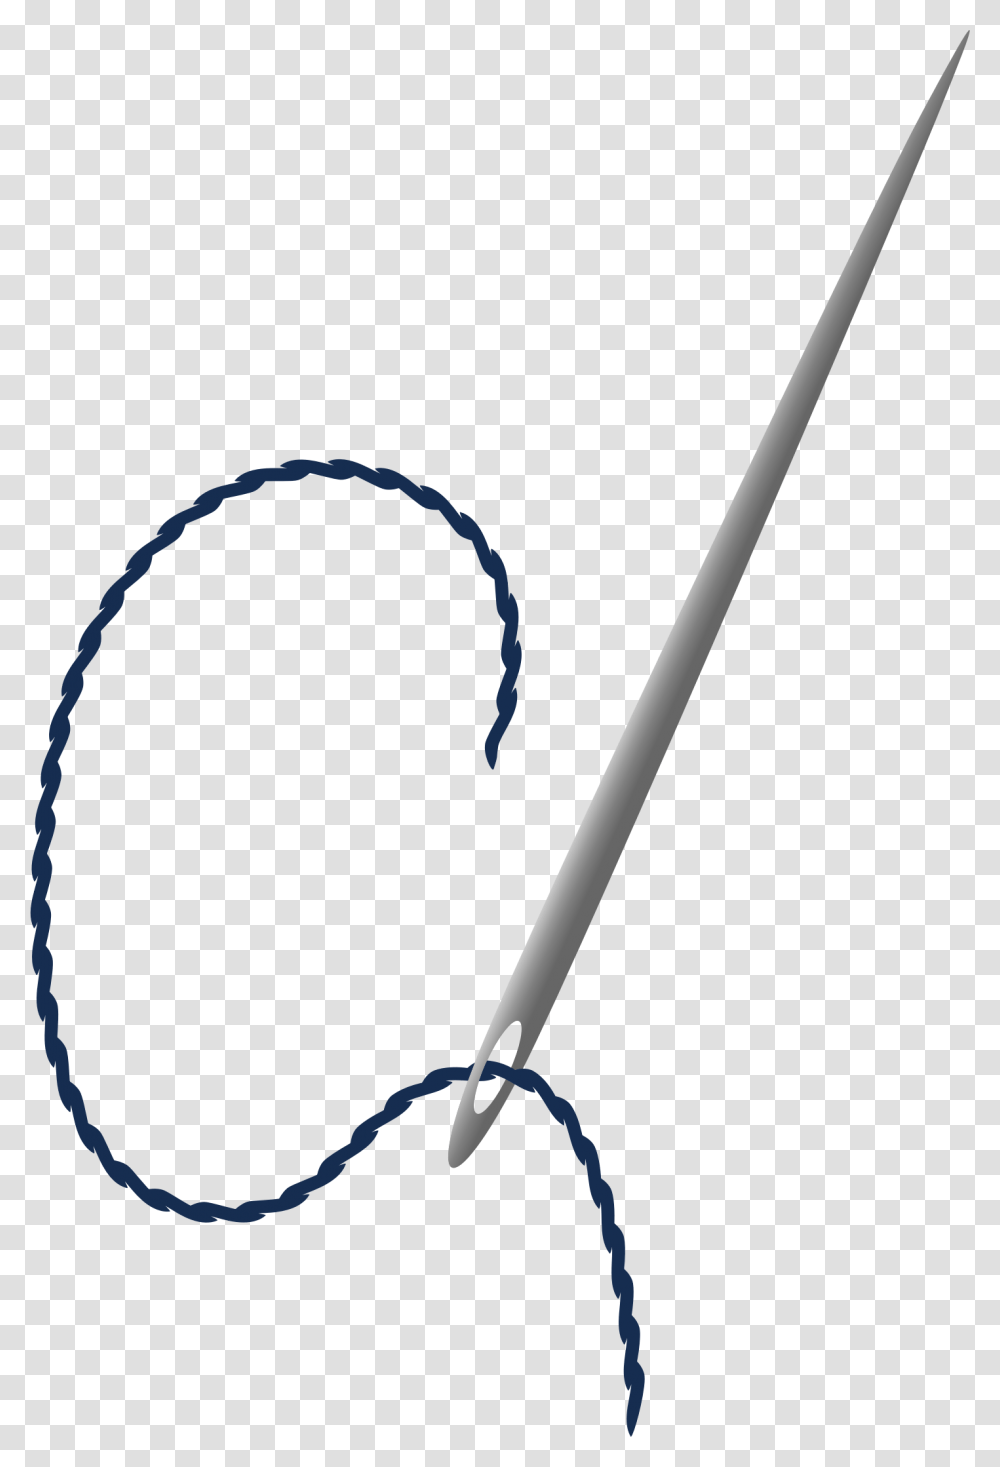 Sewing Needle With Thread Clipart Download Needle And Thread, Weapon, Weaponry, Wand, Stick Transparent Png